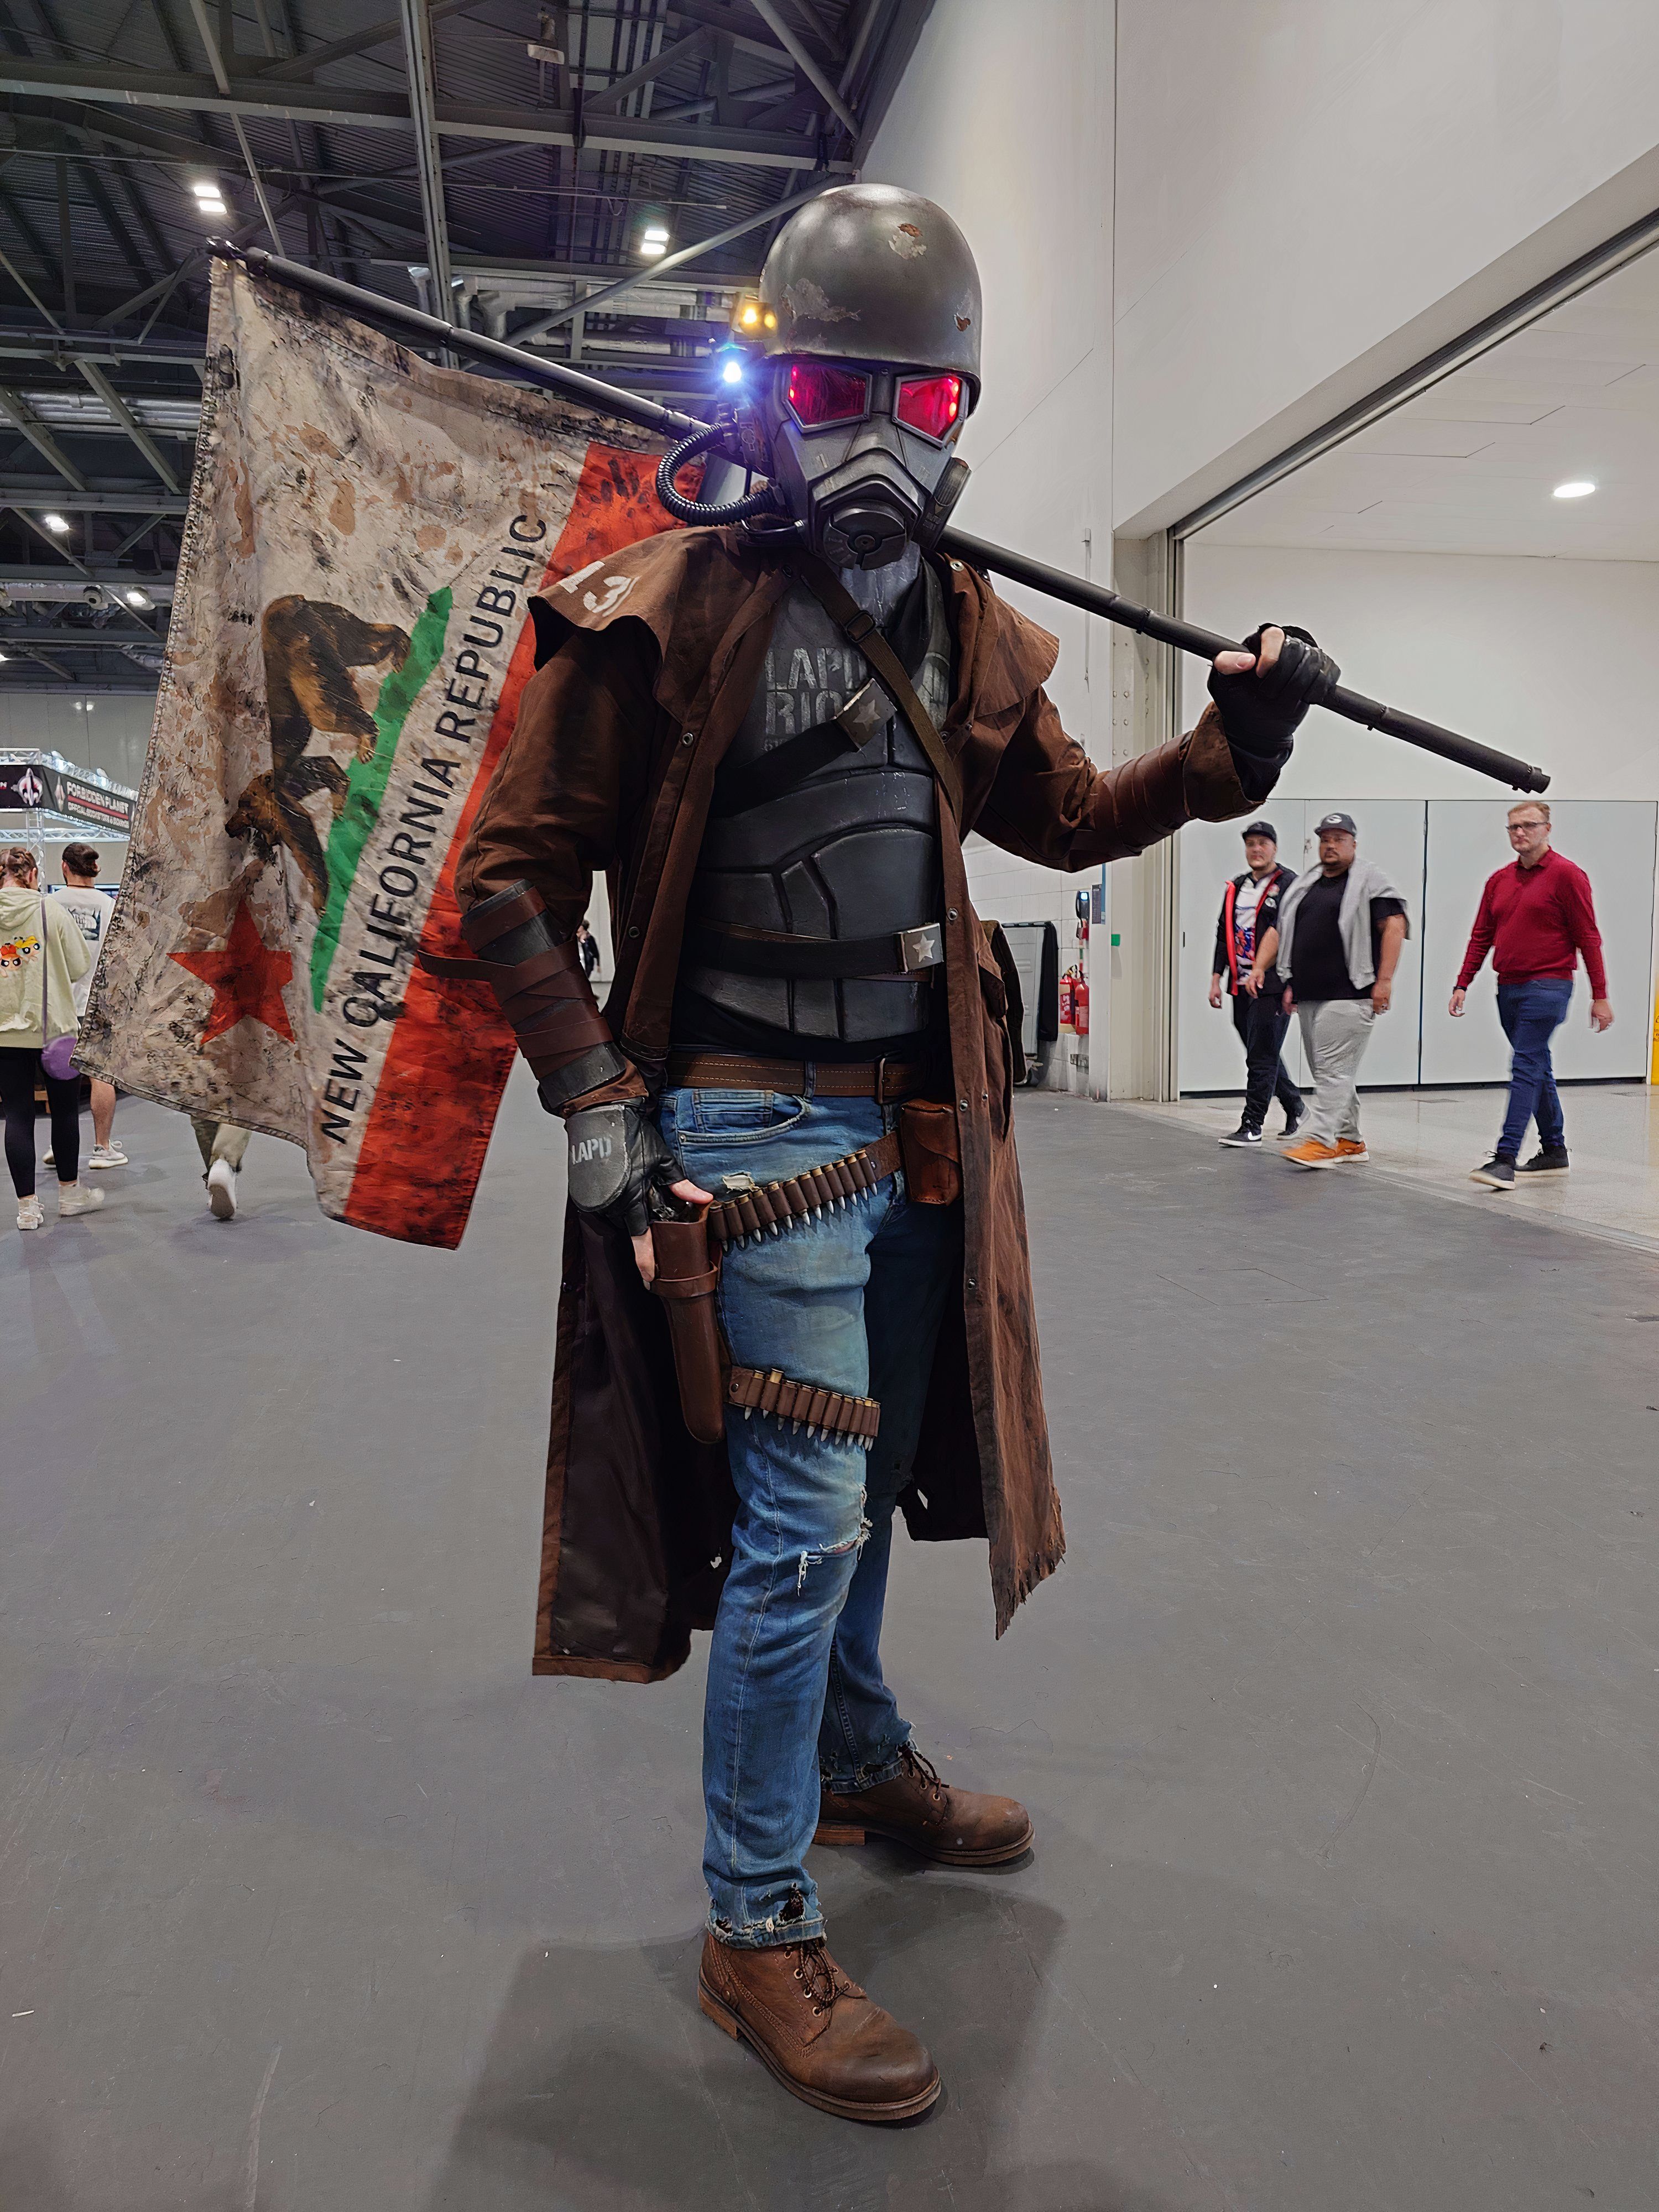 That Cosplay Guy as a NCR Ranger from Fallout New Vegas